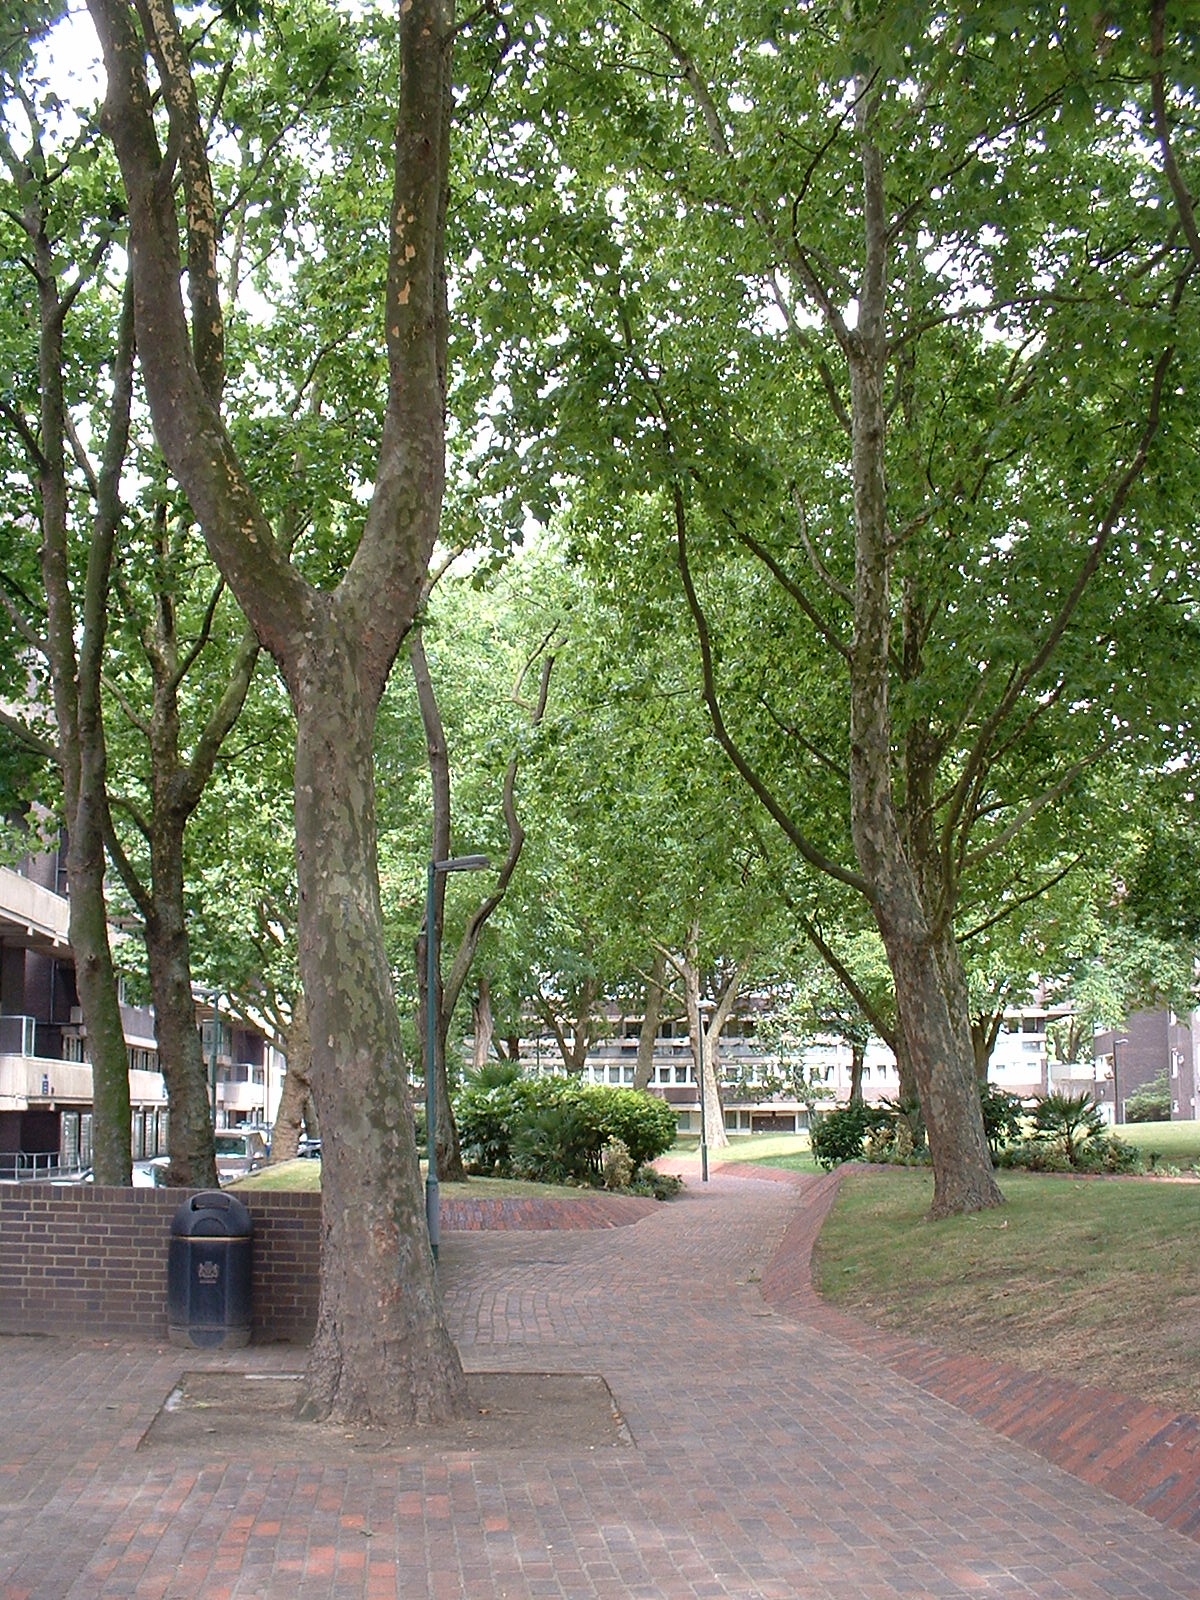 Large trees and blocks of flats around the main entrance to the Brunel Estate, in 2017